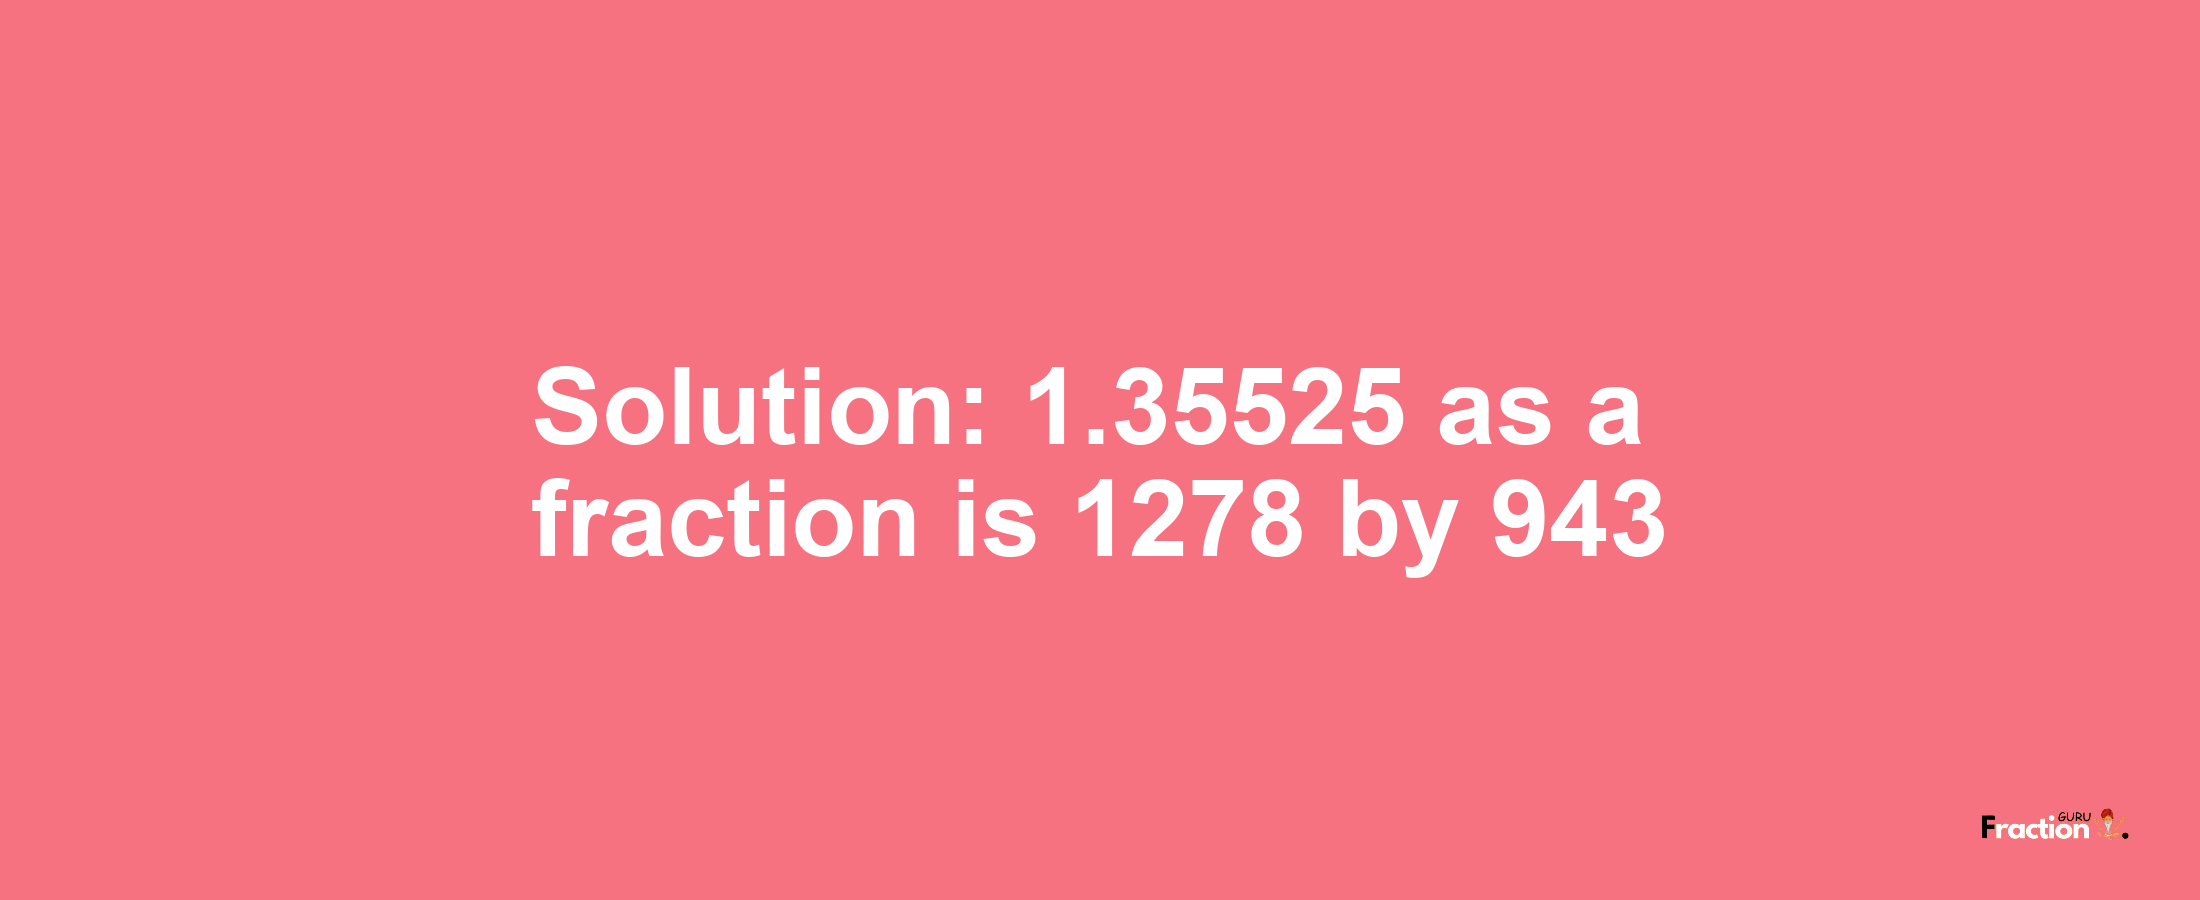 Solution:1.35525 as a fraction is 1278/943